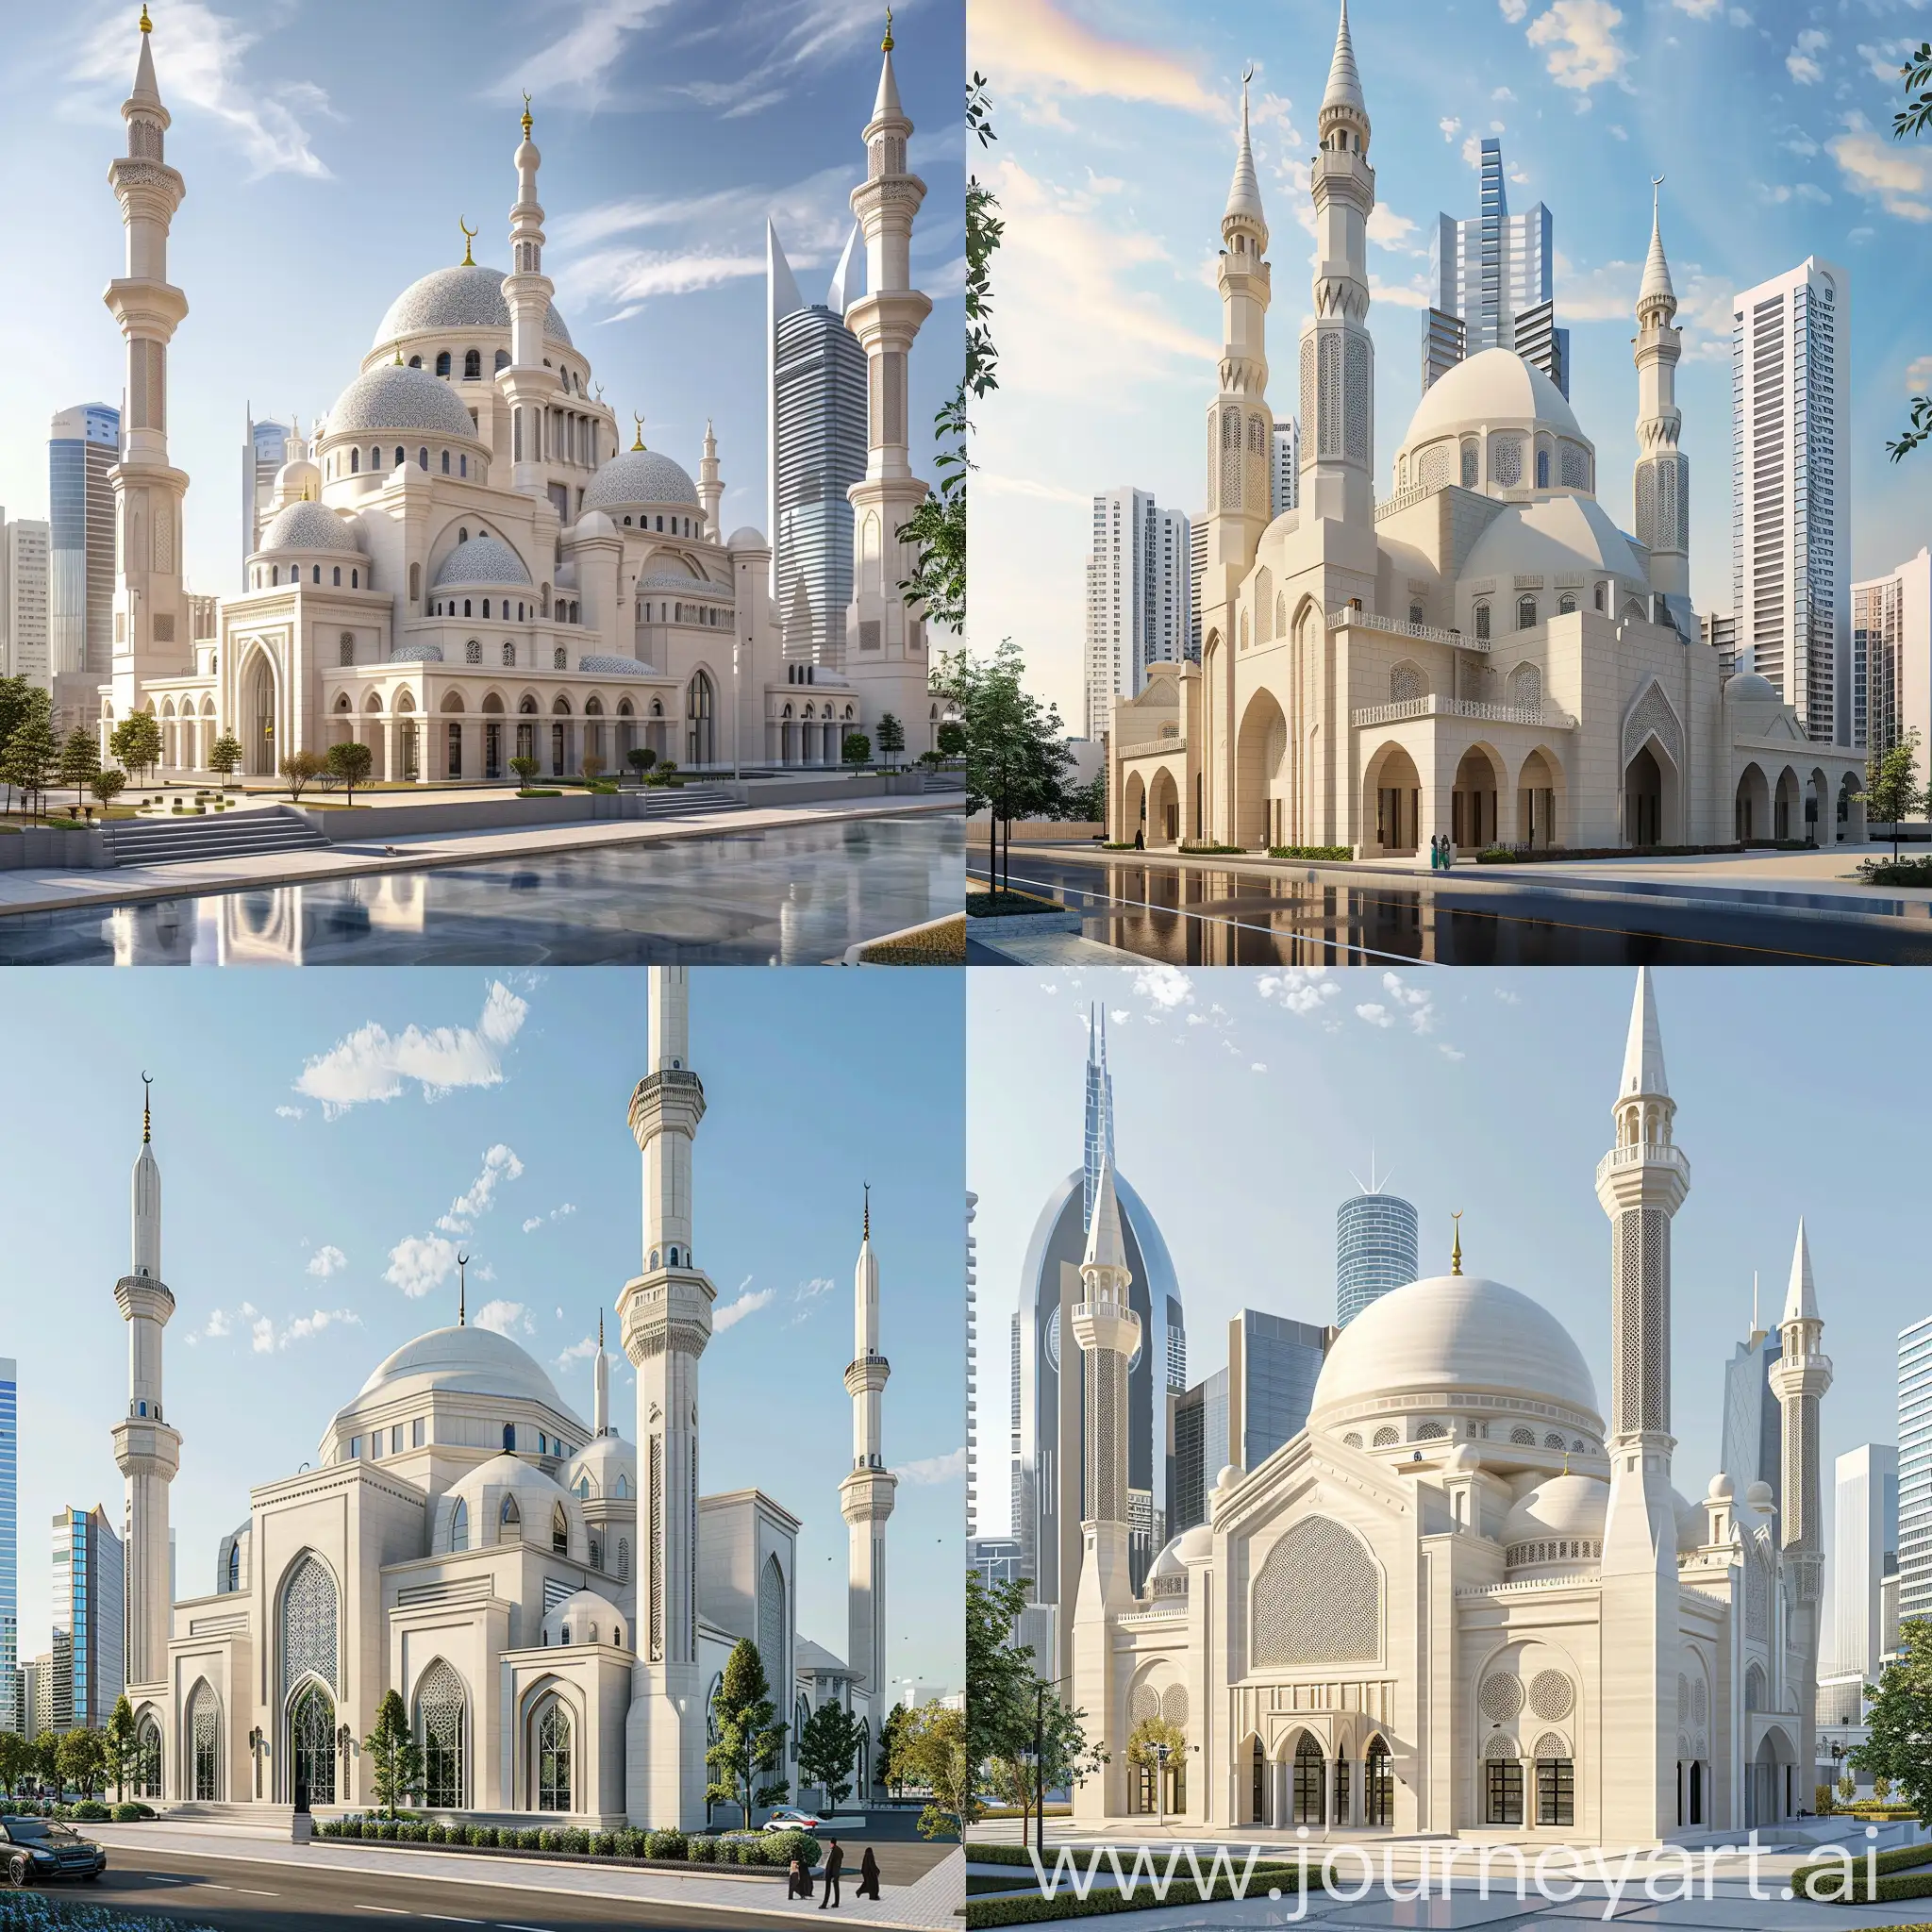 Modern-CreamColored-Mosque-in-Urban-Setting